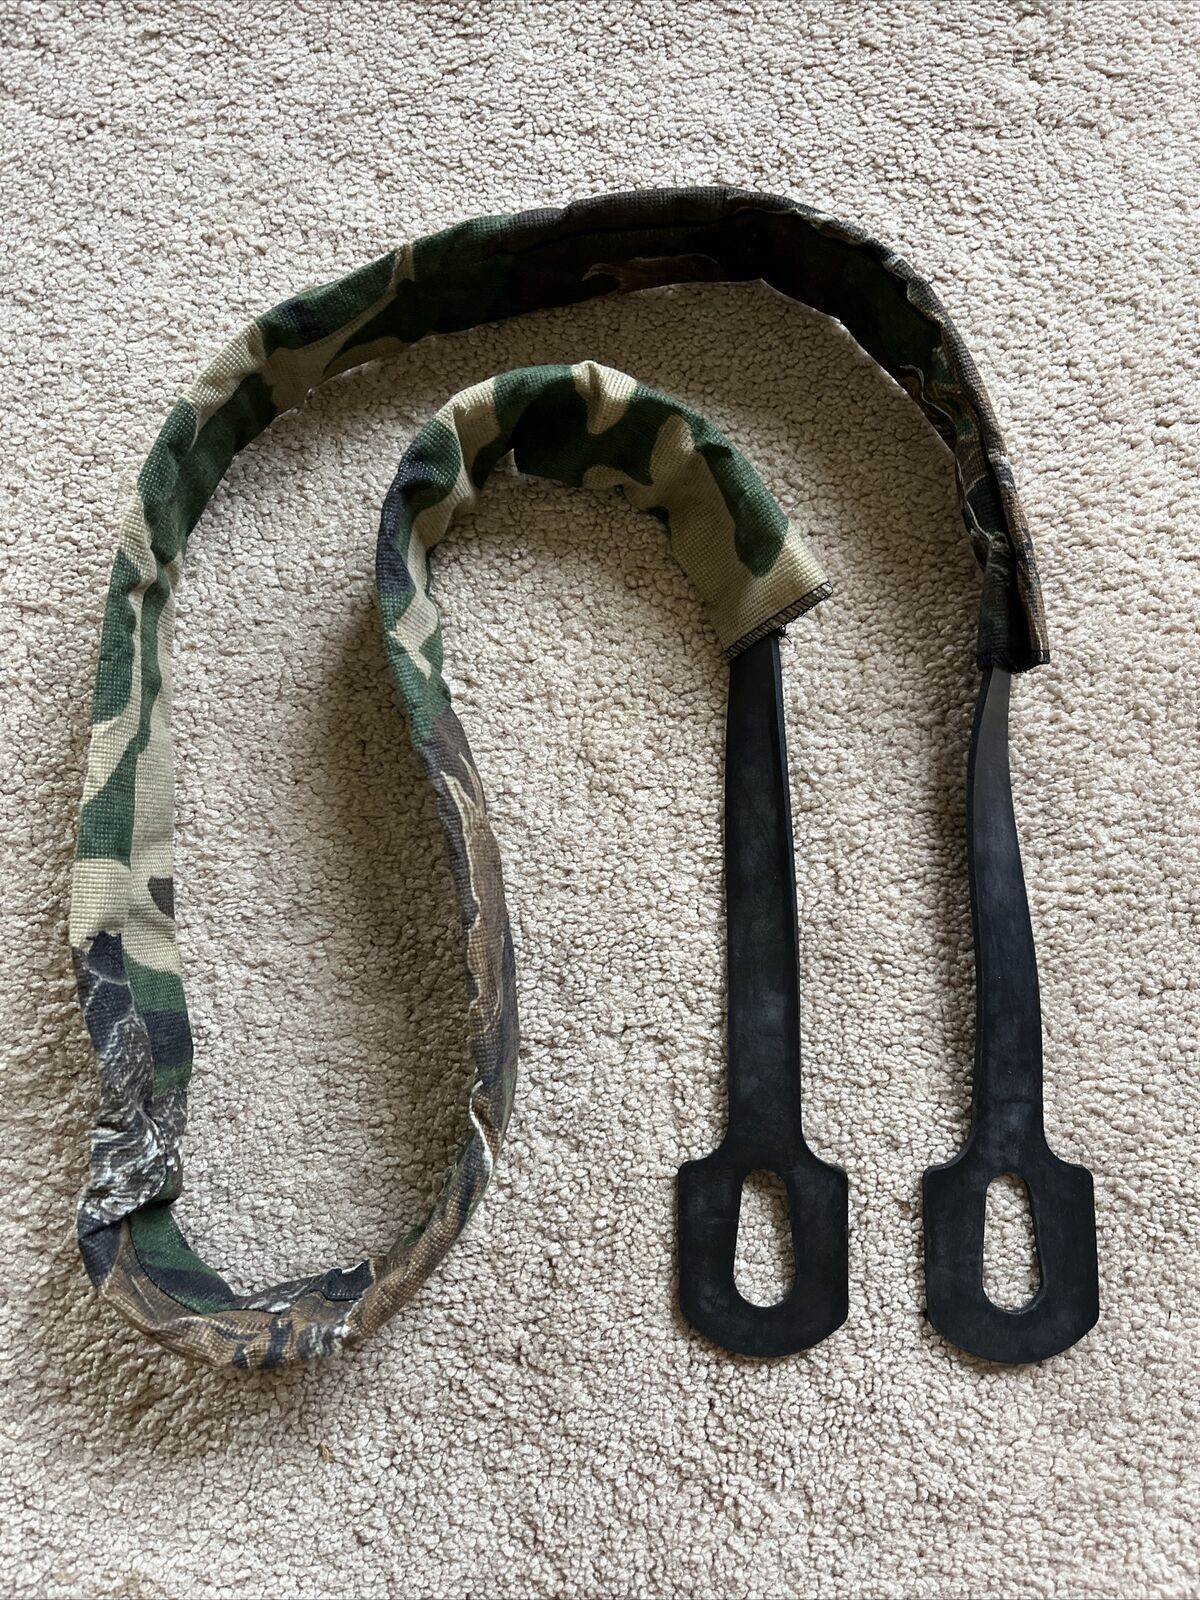 NEW Quick Shot Hunting Rifle Gun & Compound Bow Carrying Loop Sling CAMO USA